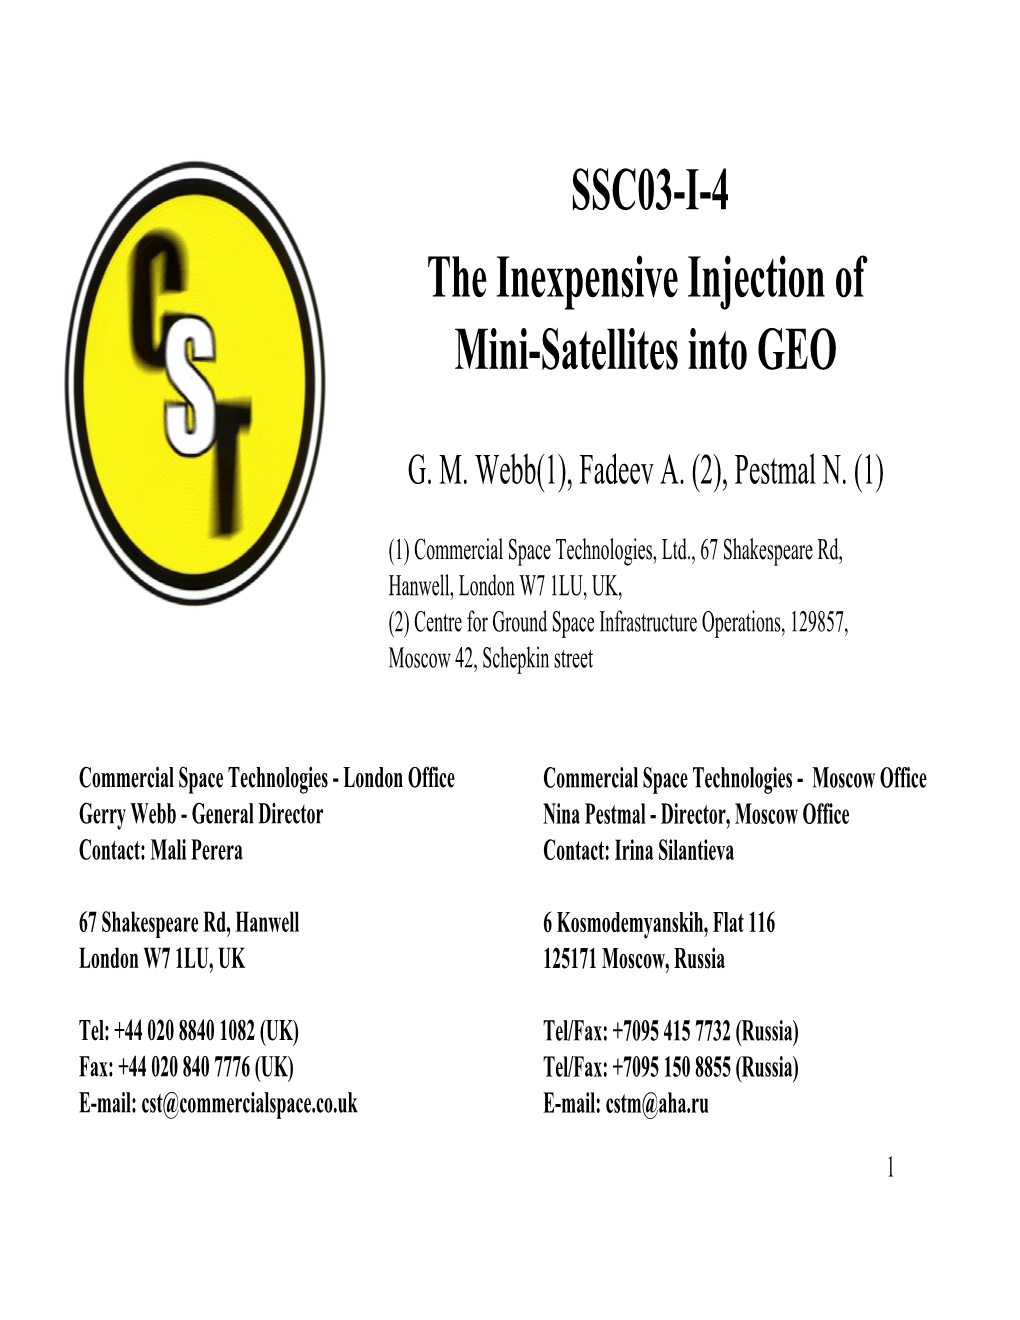 SSC03-I-4 the Inexpensive Injection of Mini-Satellites Into GEO